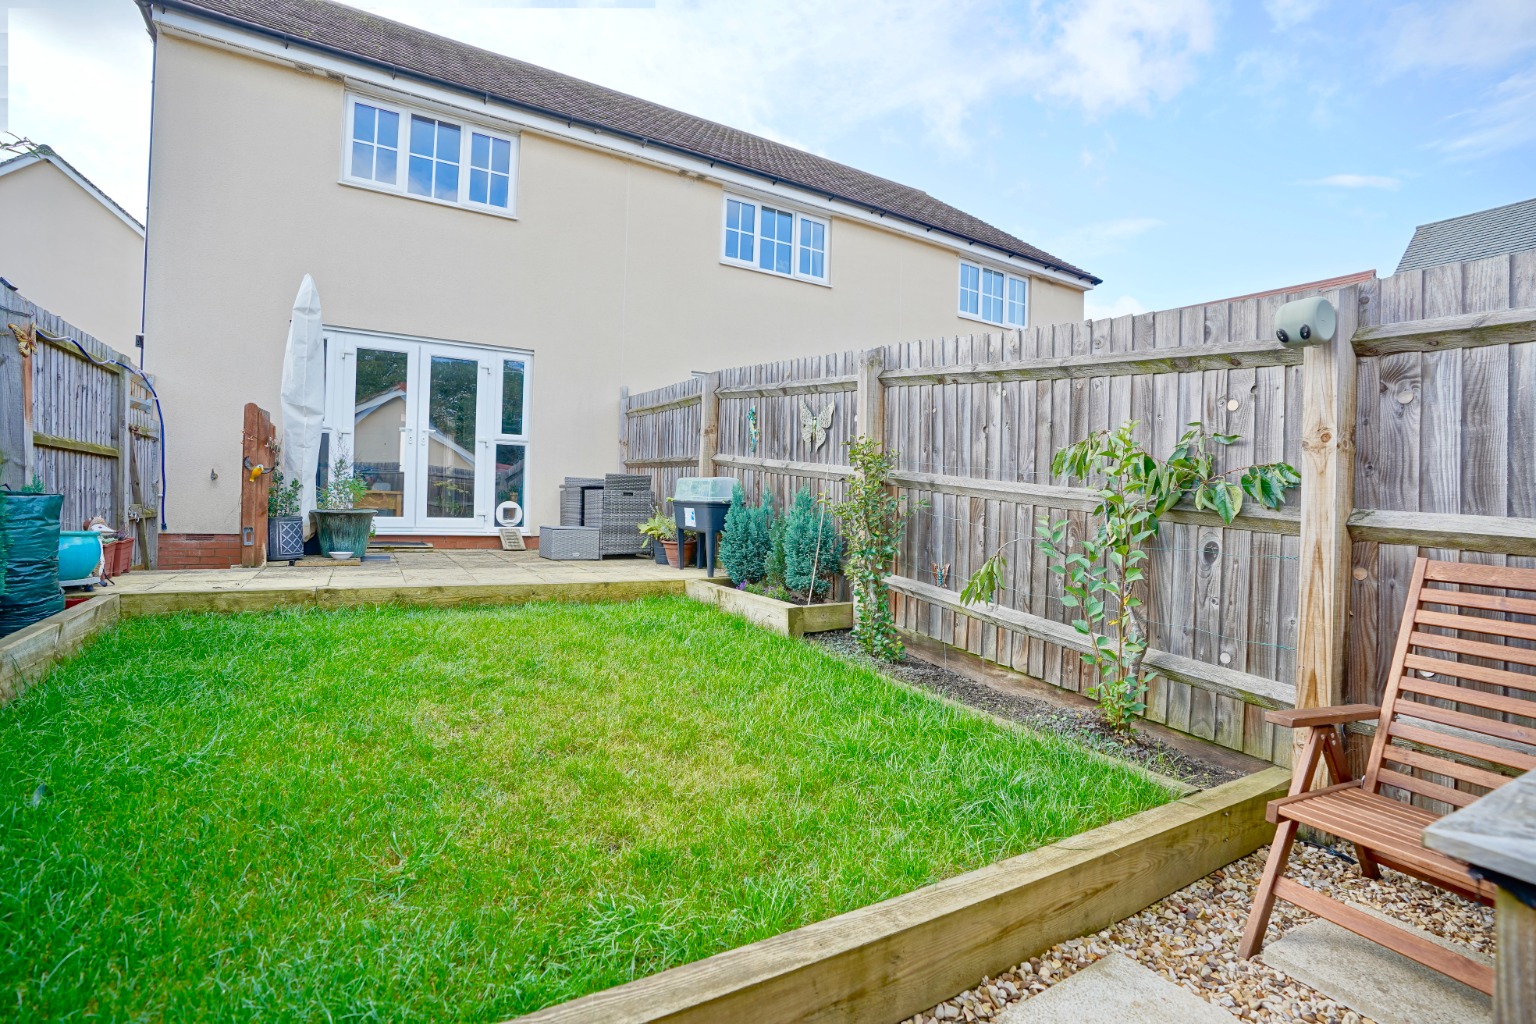 2 bed end of terrace house for sale in Summer's Hill Drive, Cambridge - Property Image 1